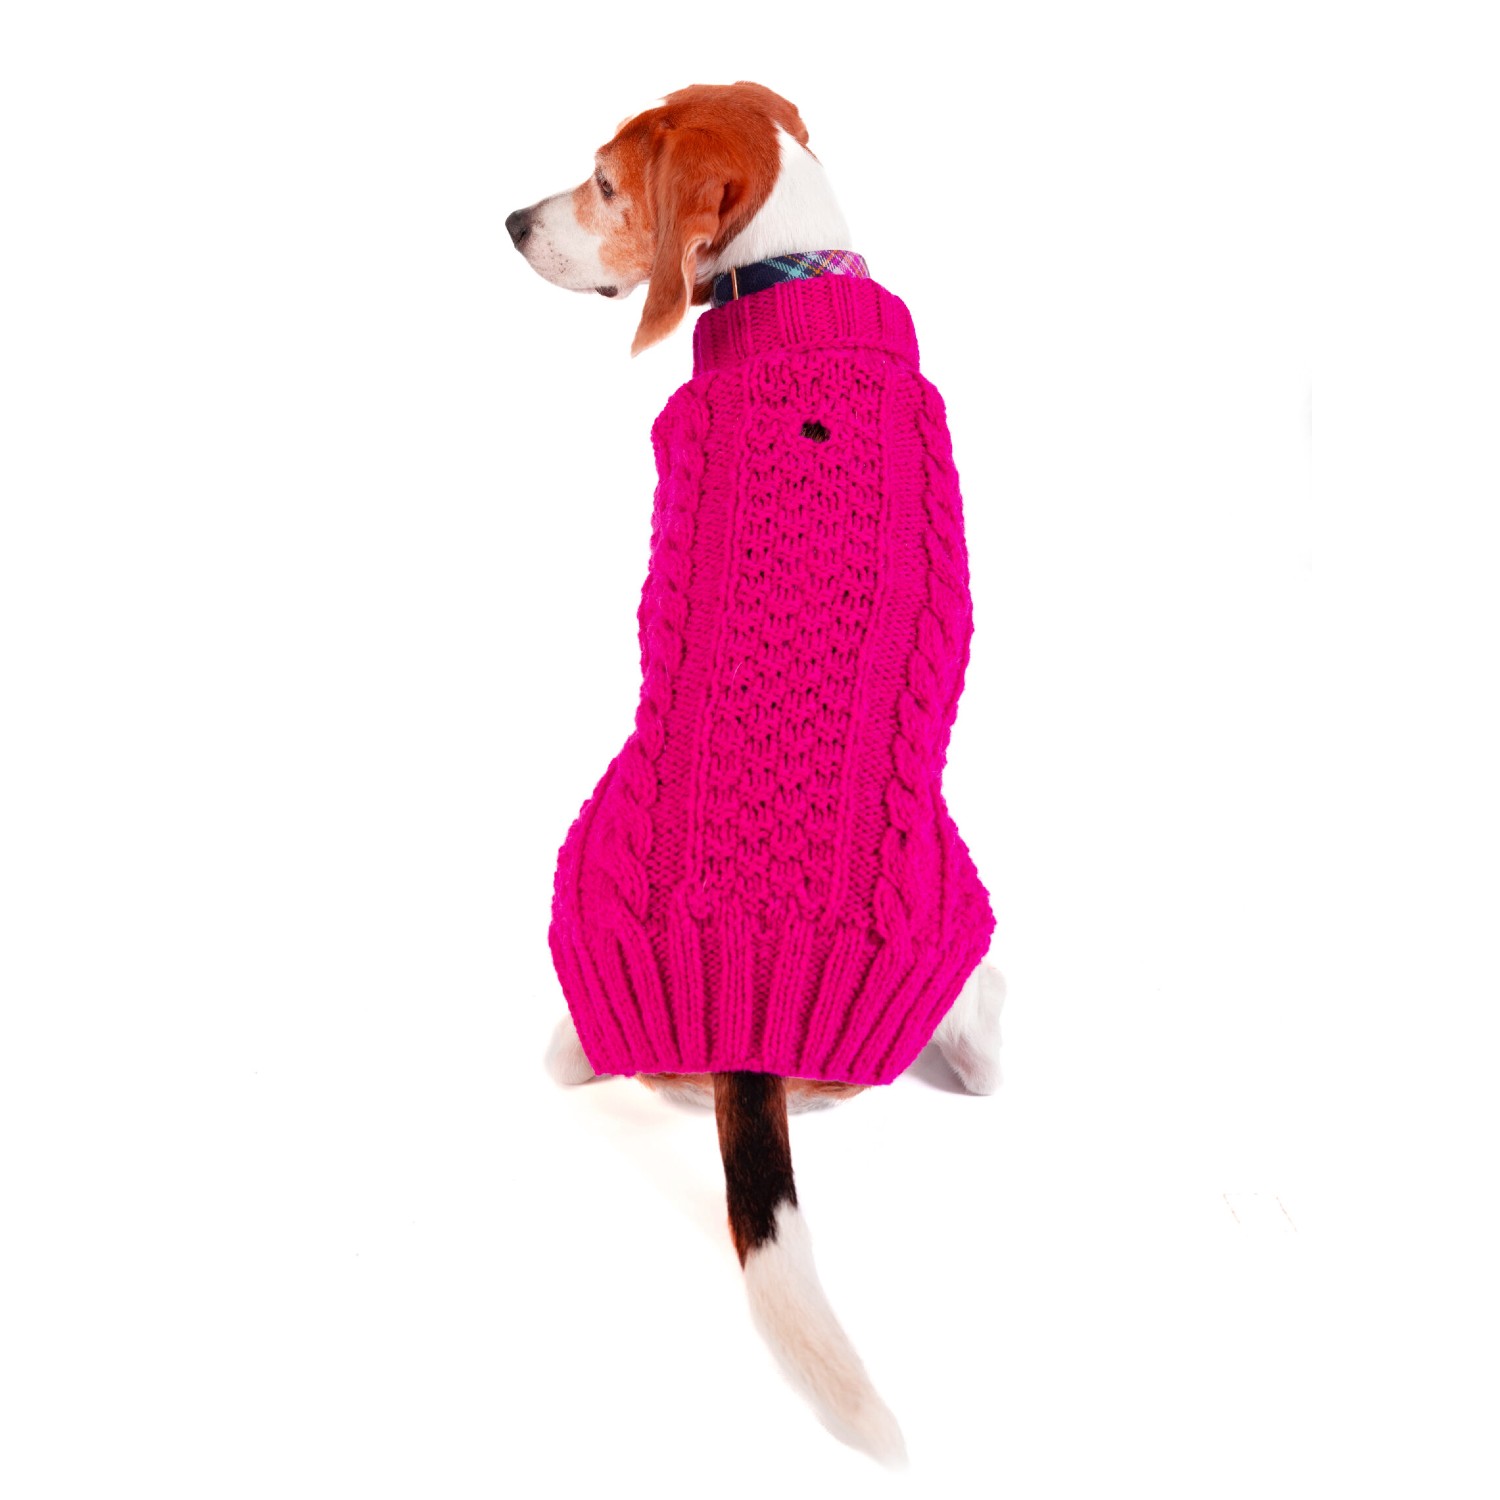 Chilly Dog Handmade Alpaca Cable Knit Dog Sweater - Hot Pink